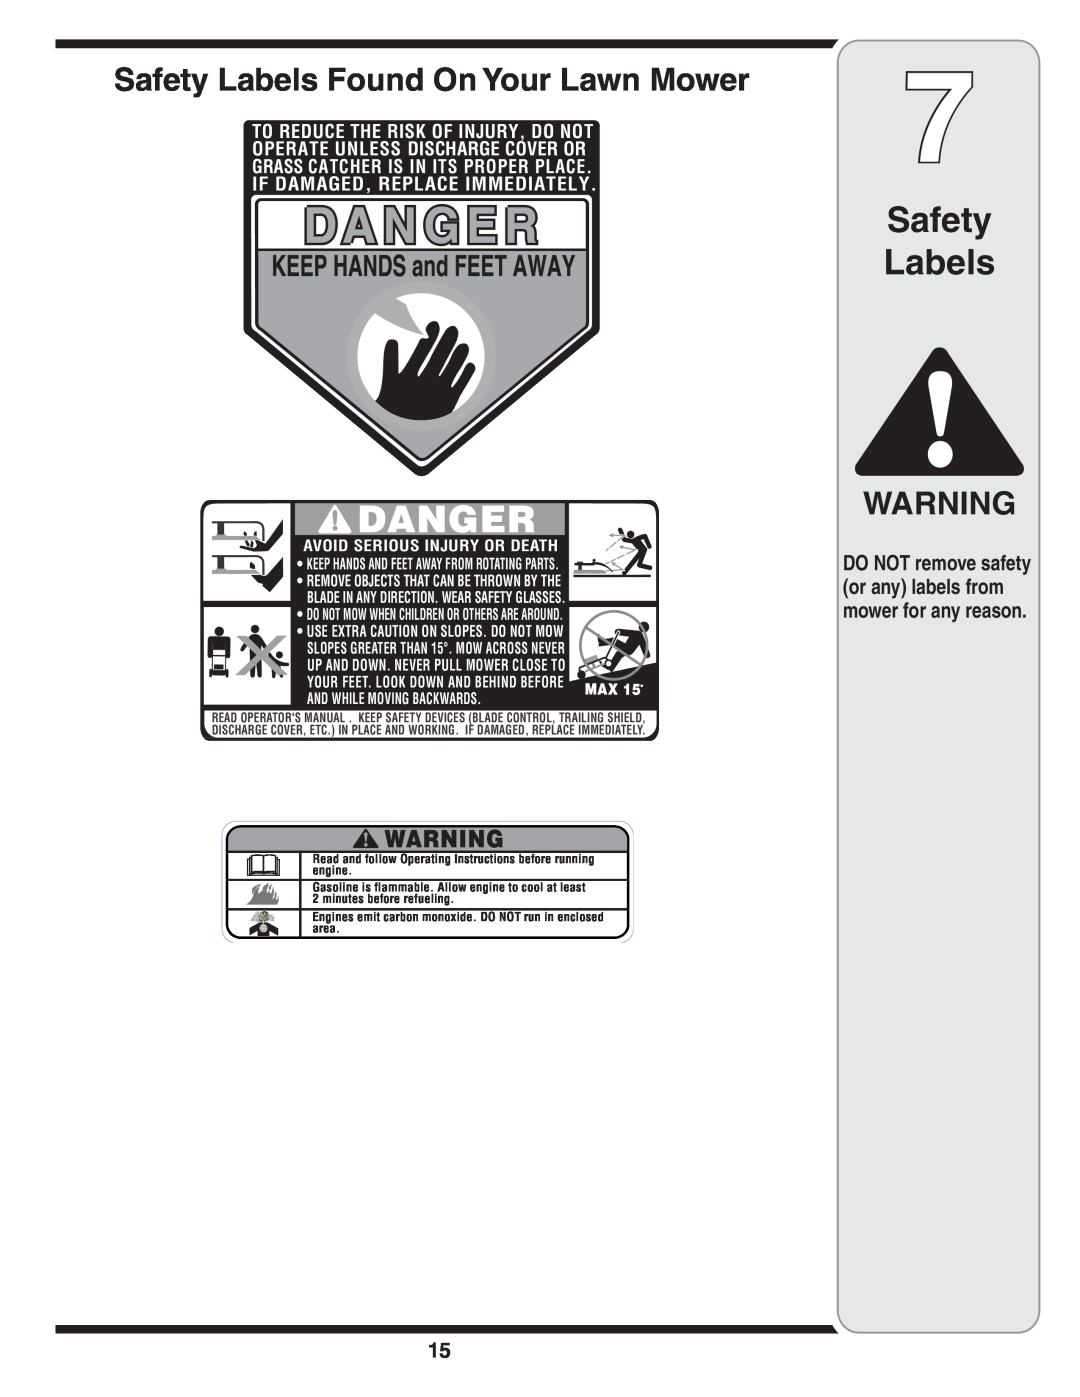 White Outdoor 83M Safety Labels Found On Your Lawn Mower, DO NOT remove safety or any labels from mower for any reason 